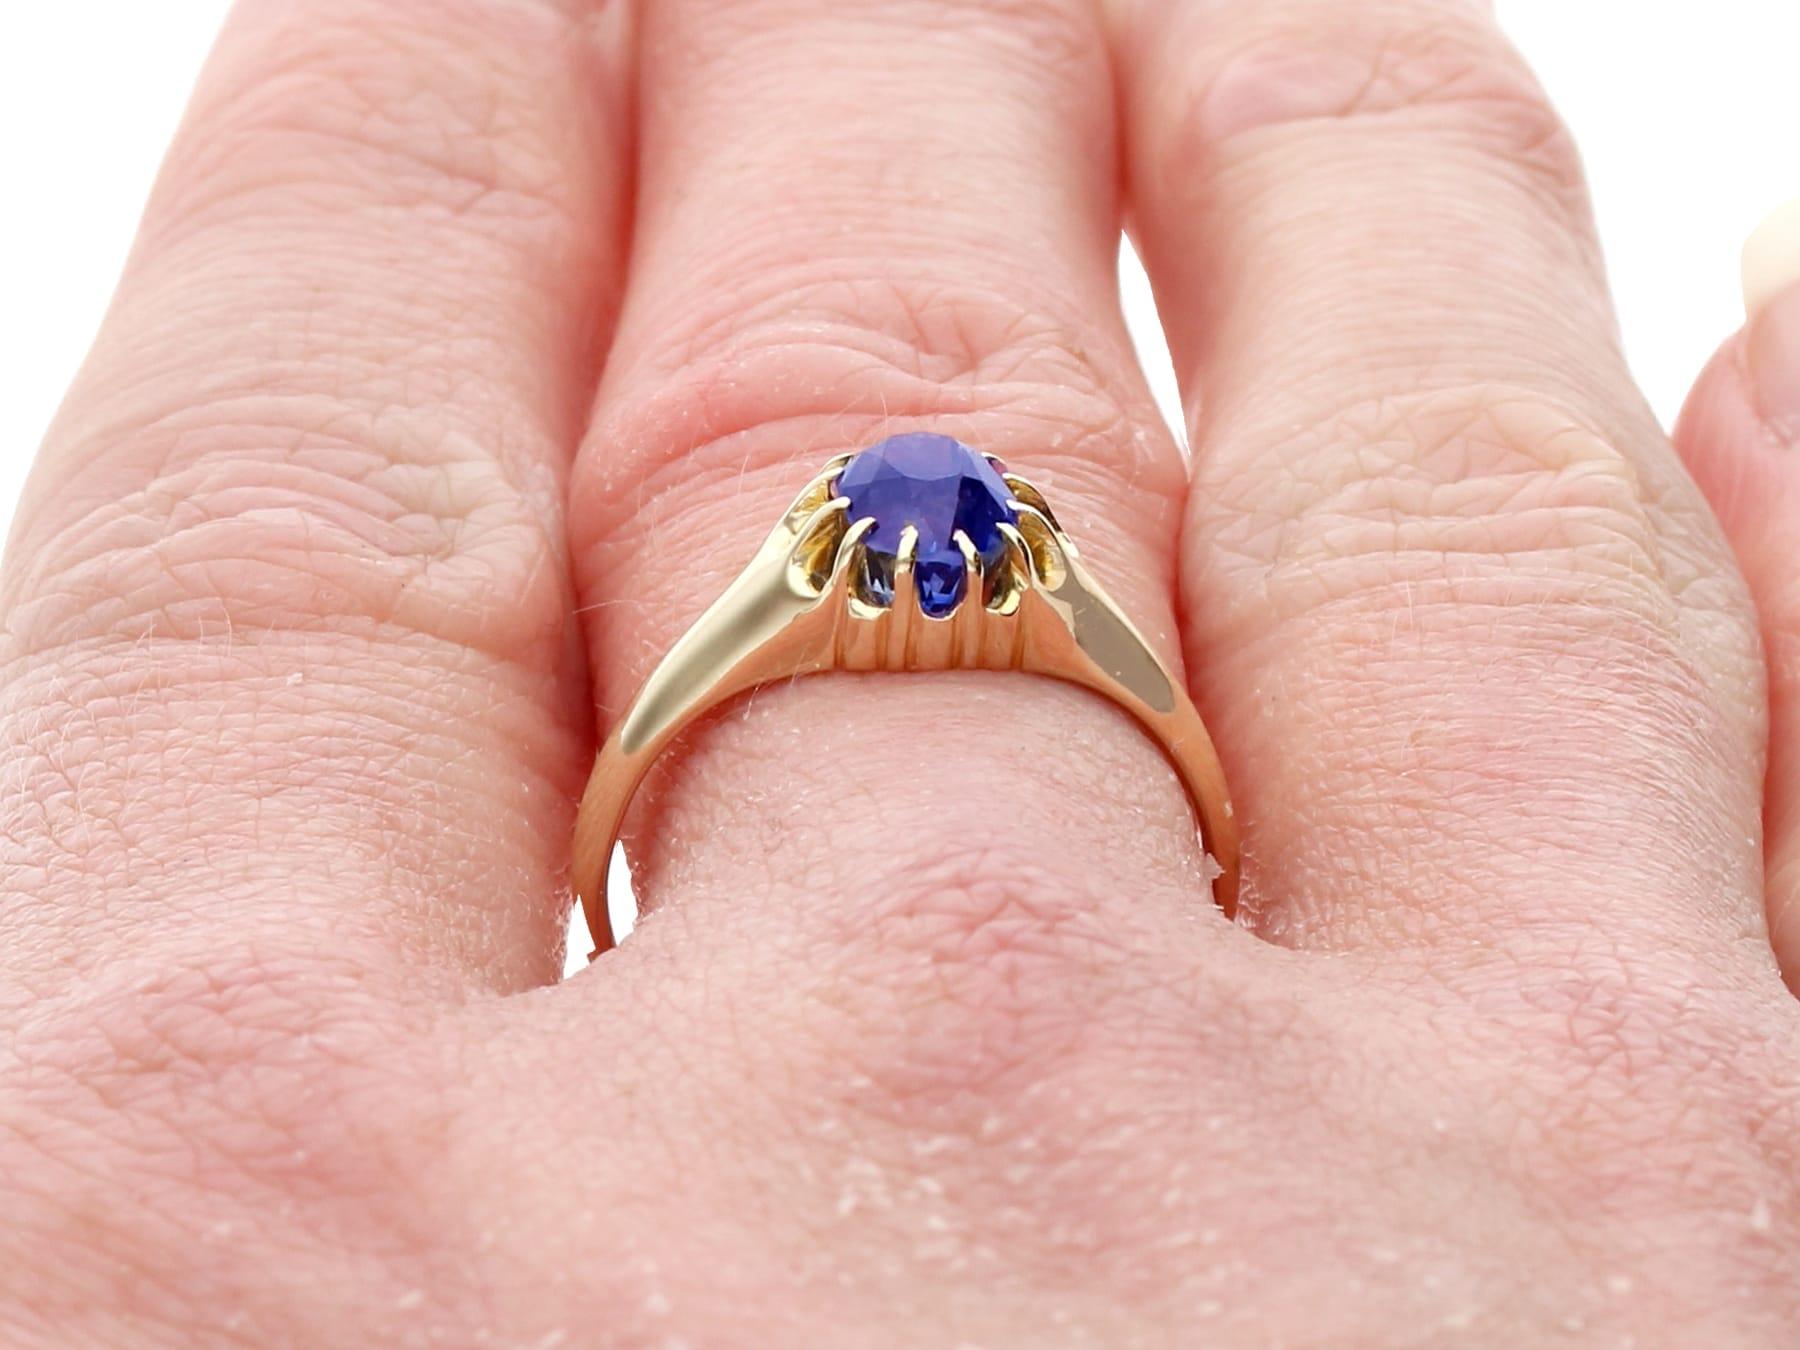 Antique 1.42 Carat Basaltic Sapphire and 14k Yellow Gold Ring, circa 1910 For Sale 4